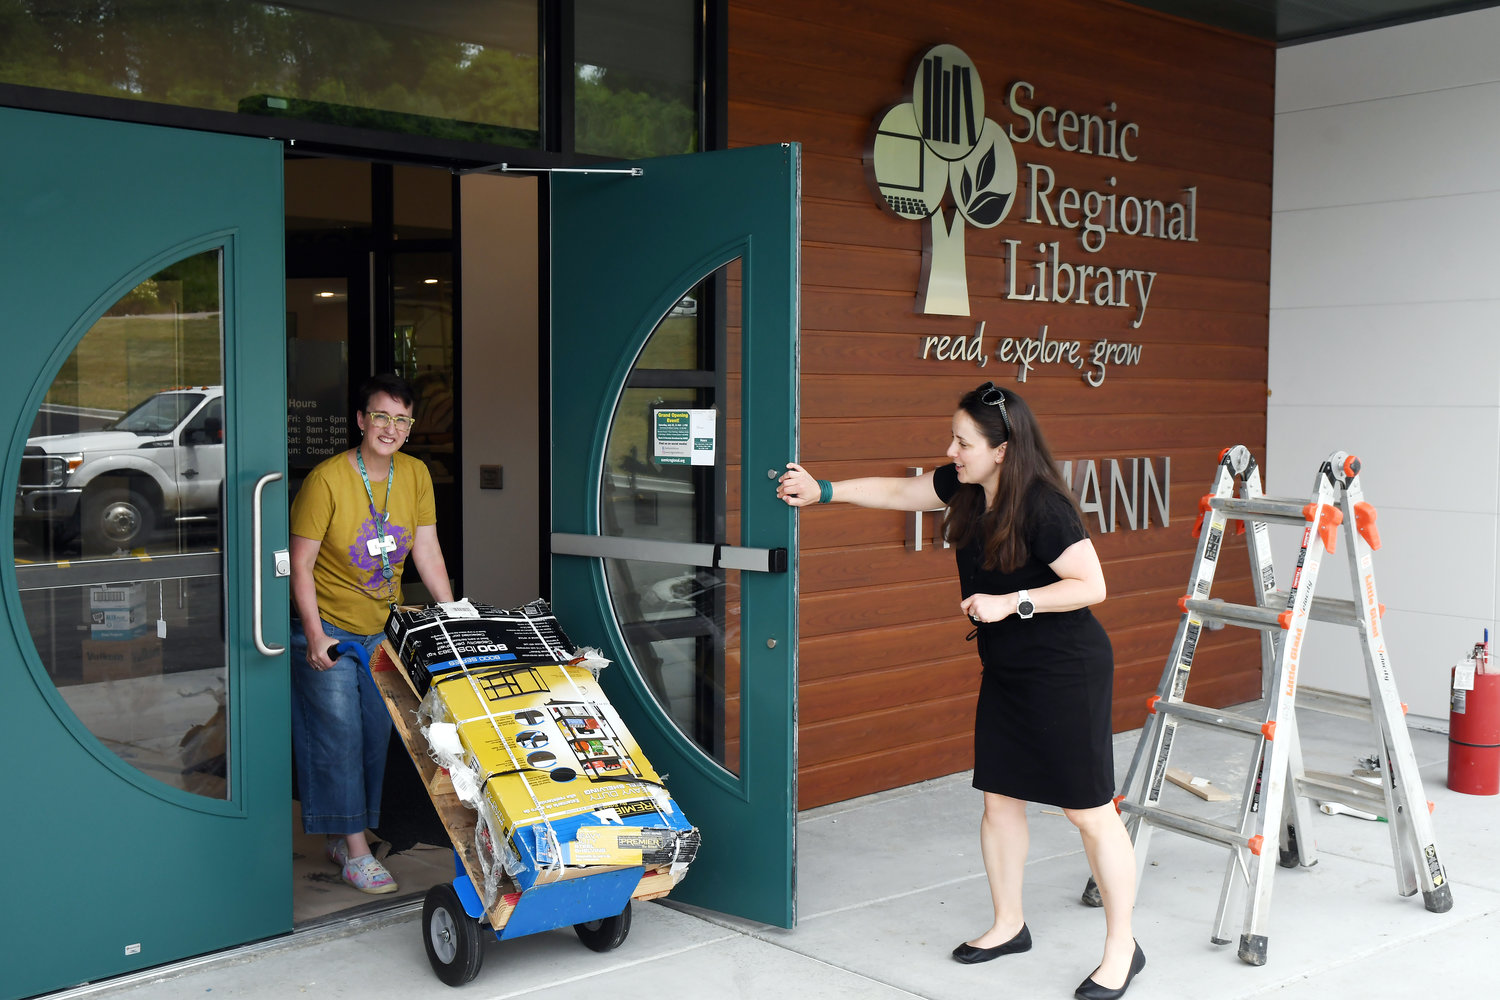 Scenic Regional Library staff members Christy Schink (left), associate director of youth and outreach services, and Megan Maurer, assistant director, move a wheel cart load of supplies on Friday morning into the newly created facility in Hermann.